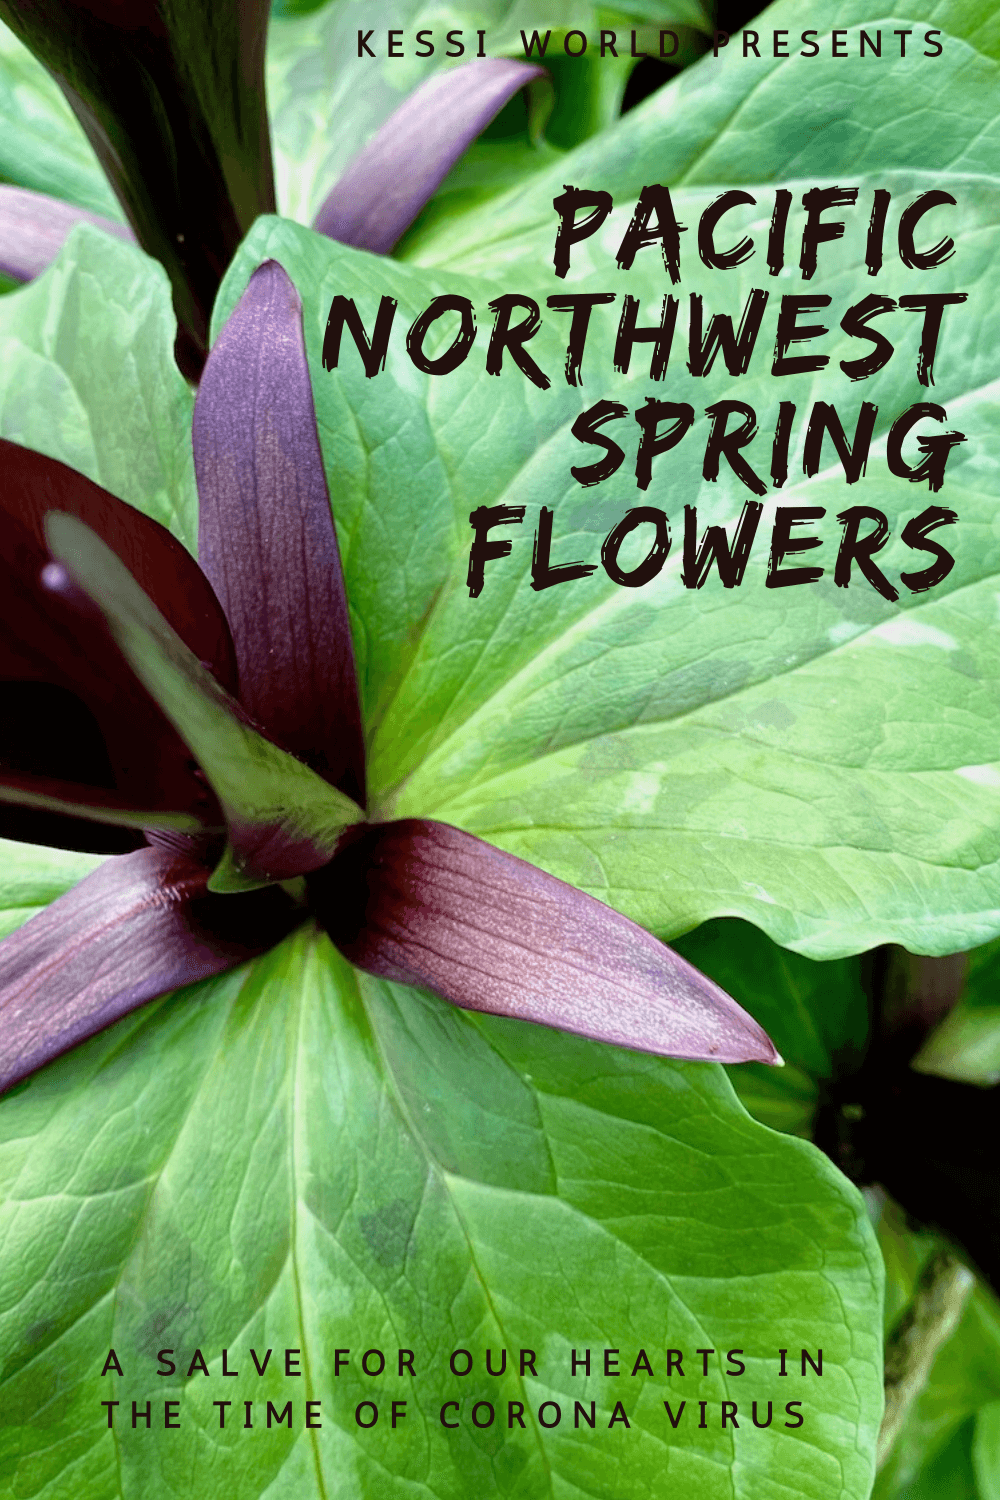 This ornate form of trillium comes to life with three variegated green triangular leaves for each rich purple four petaled blossom. The plant feels hearty in an elegant way.